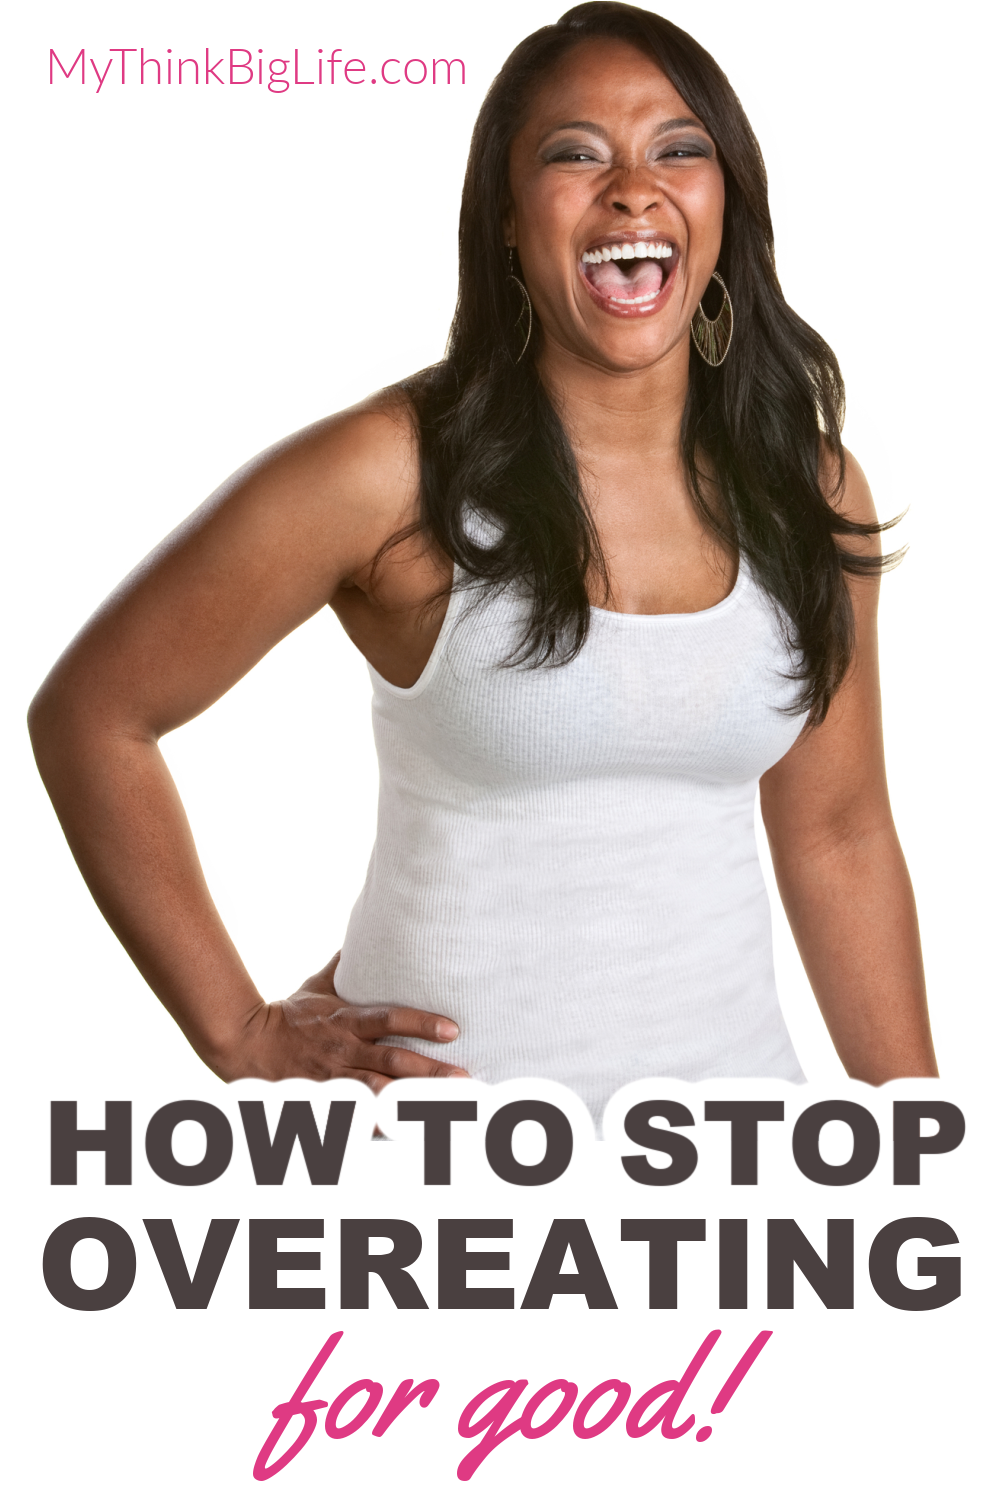 Picture of woman laughing with words: How to stop overeating for good.